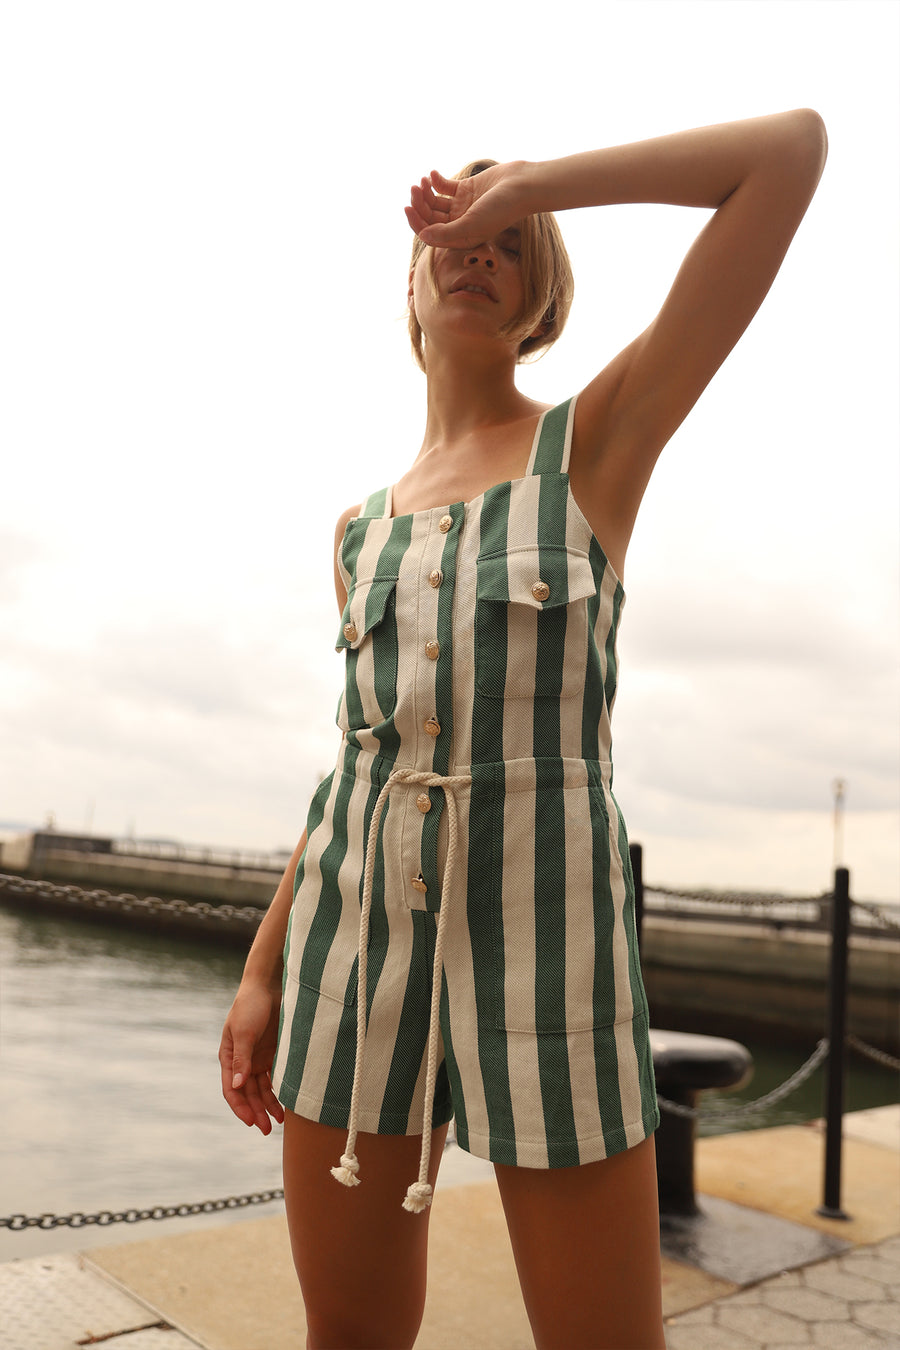 This is a photo of a woman wearing a green striped romper with a rope belt at the waist and gold buttons down the center front. She stands in front of a body of water.